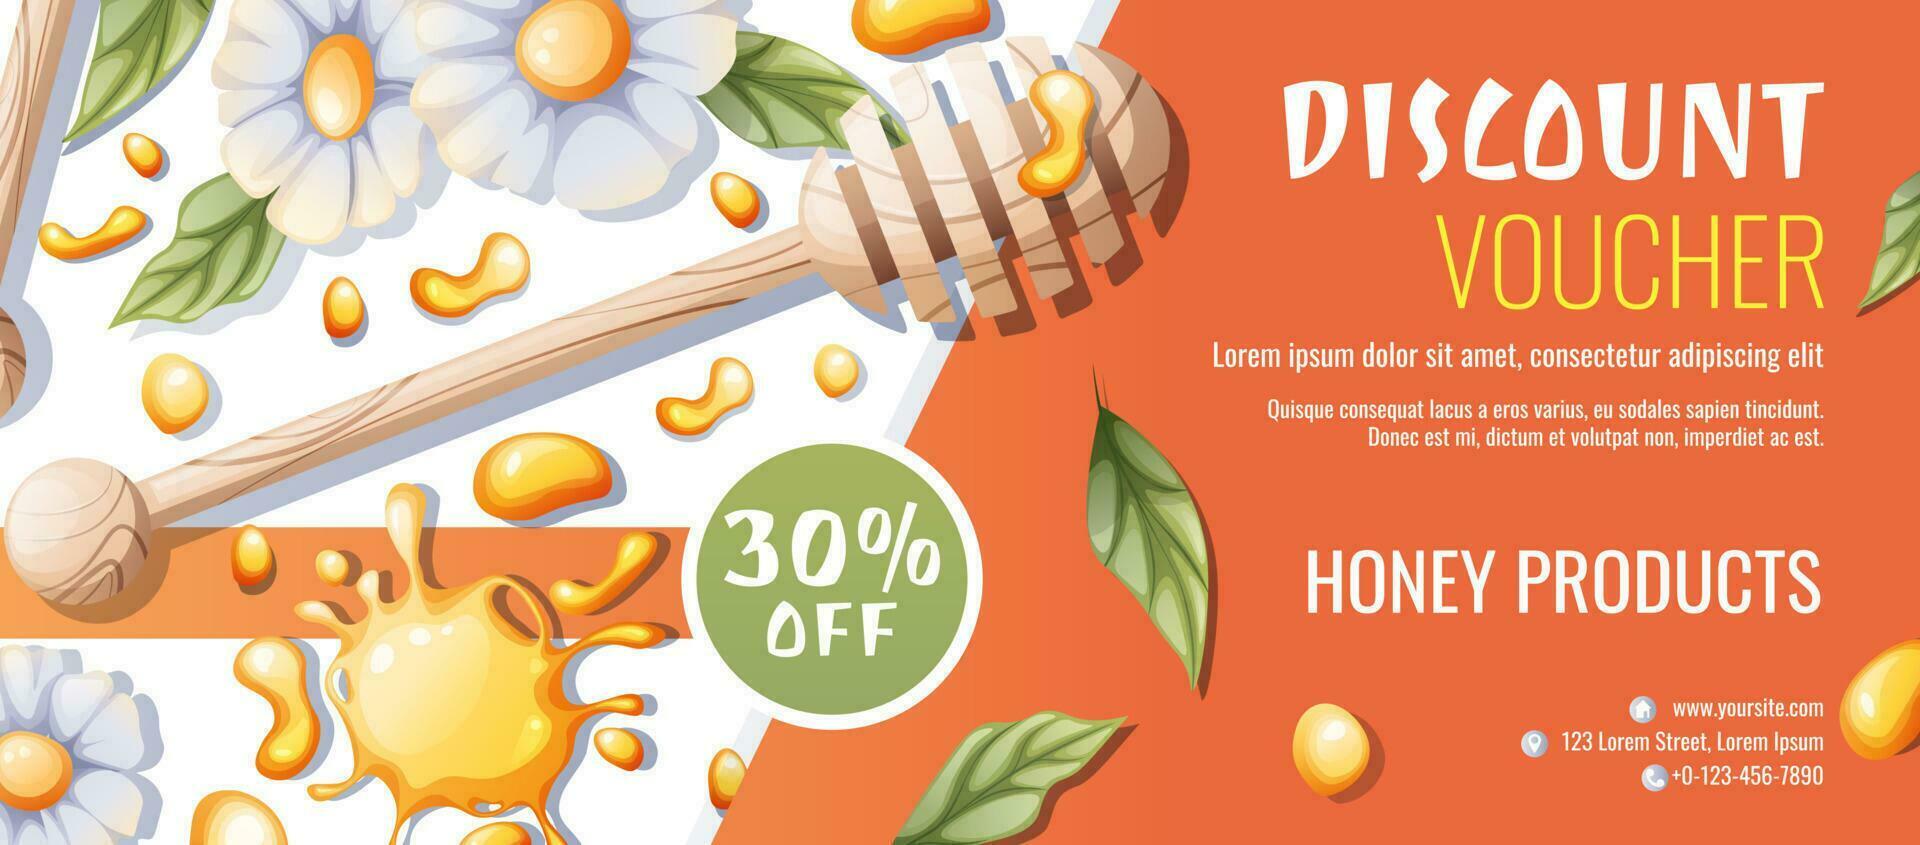 Sale banner with honey products. Discount voucher for honey shop. Honey spoon with flowers. Healthy organic food. Vector background.